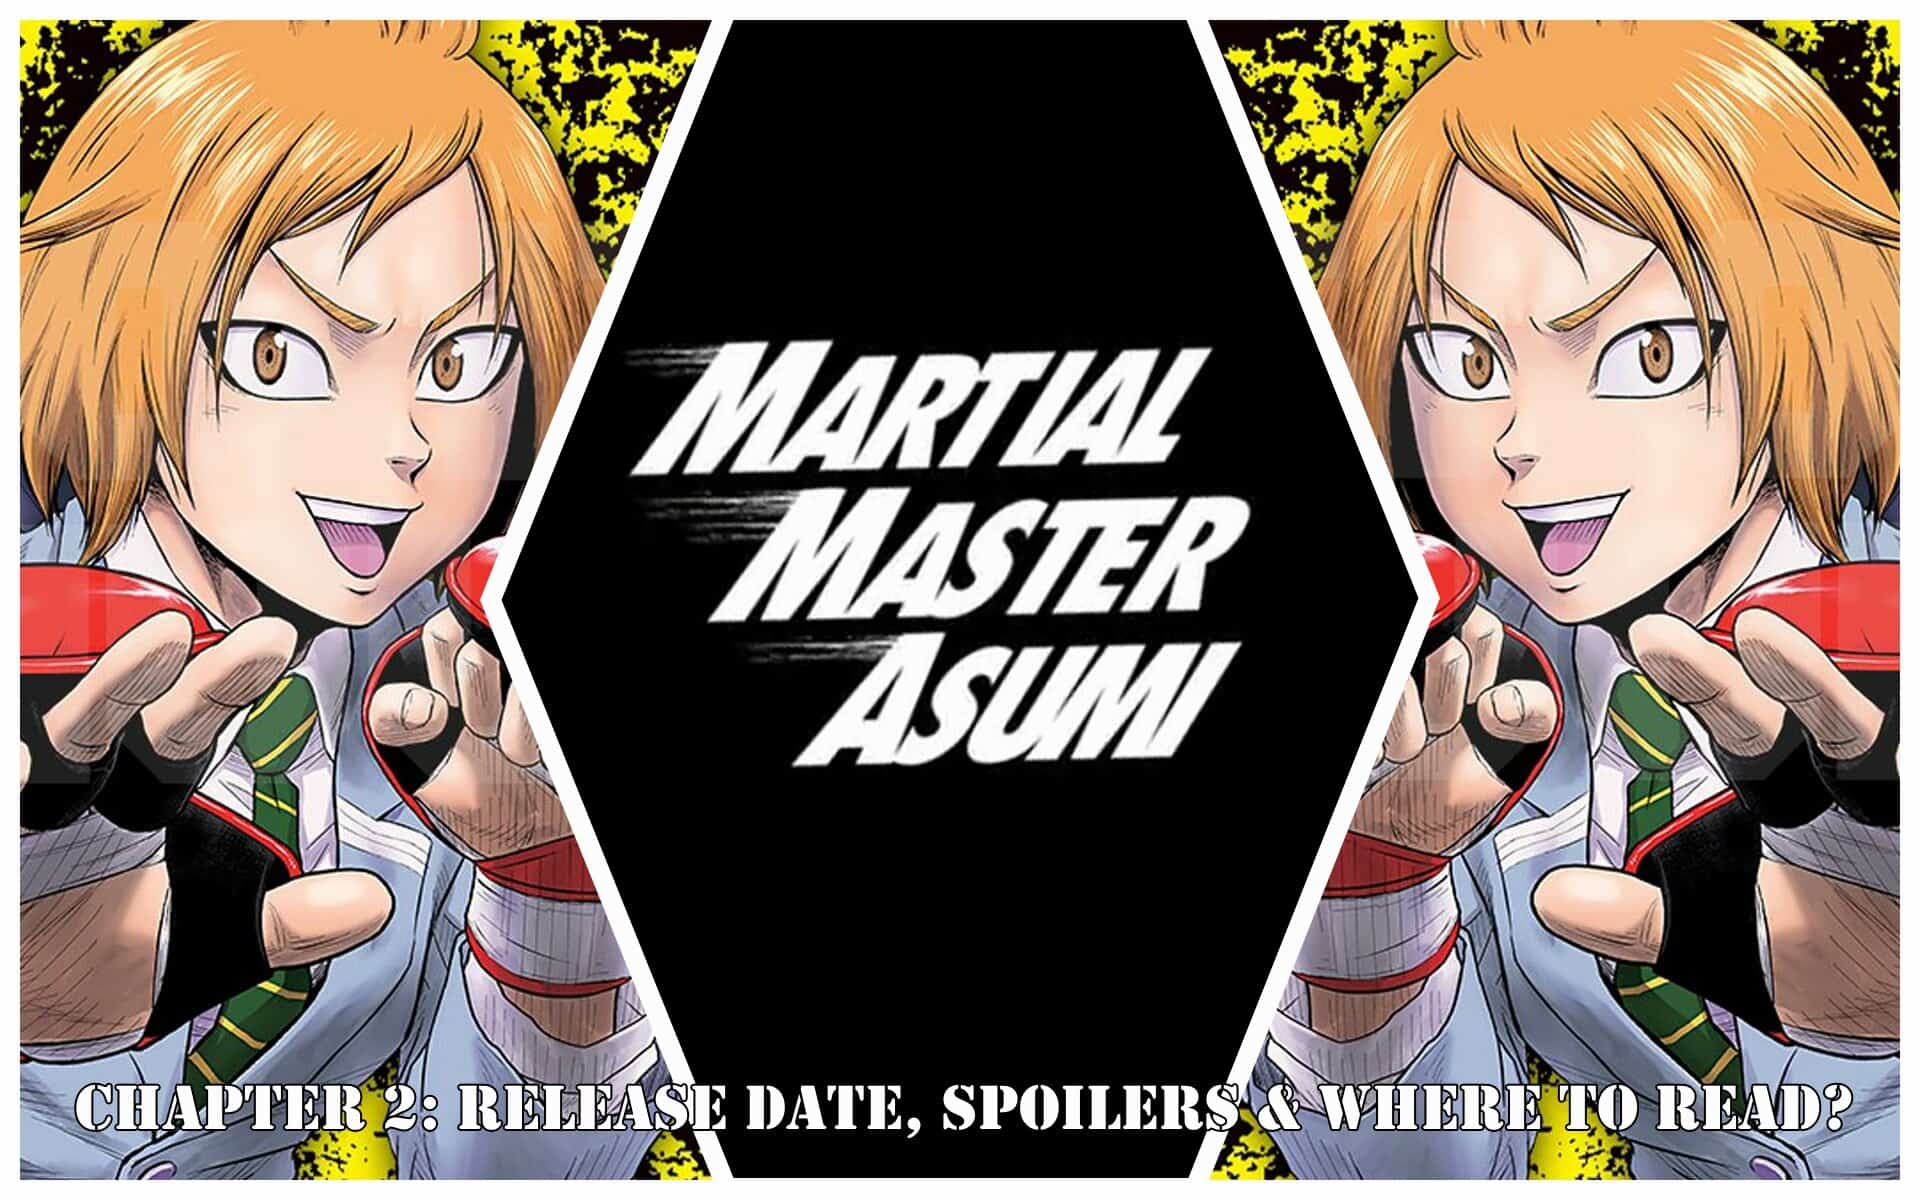 Martial Master Asumi Chapter 2: Release Date, Spoilers & Where to Read?